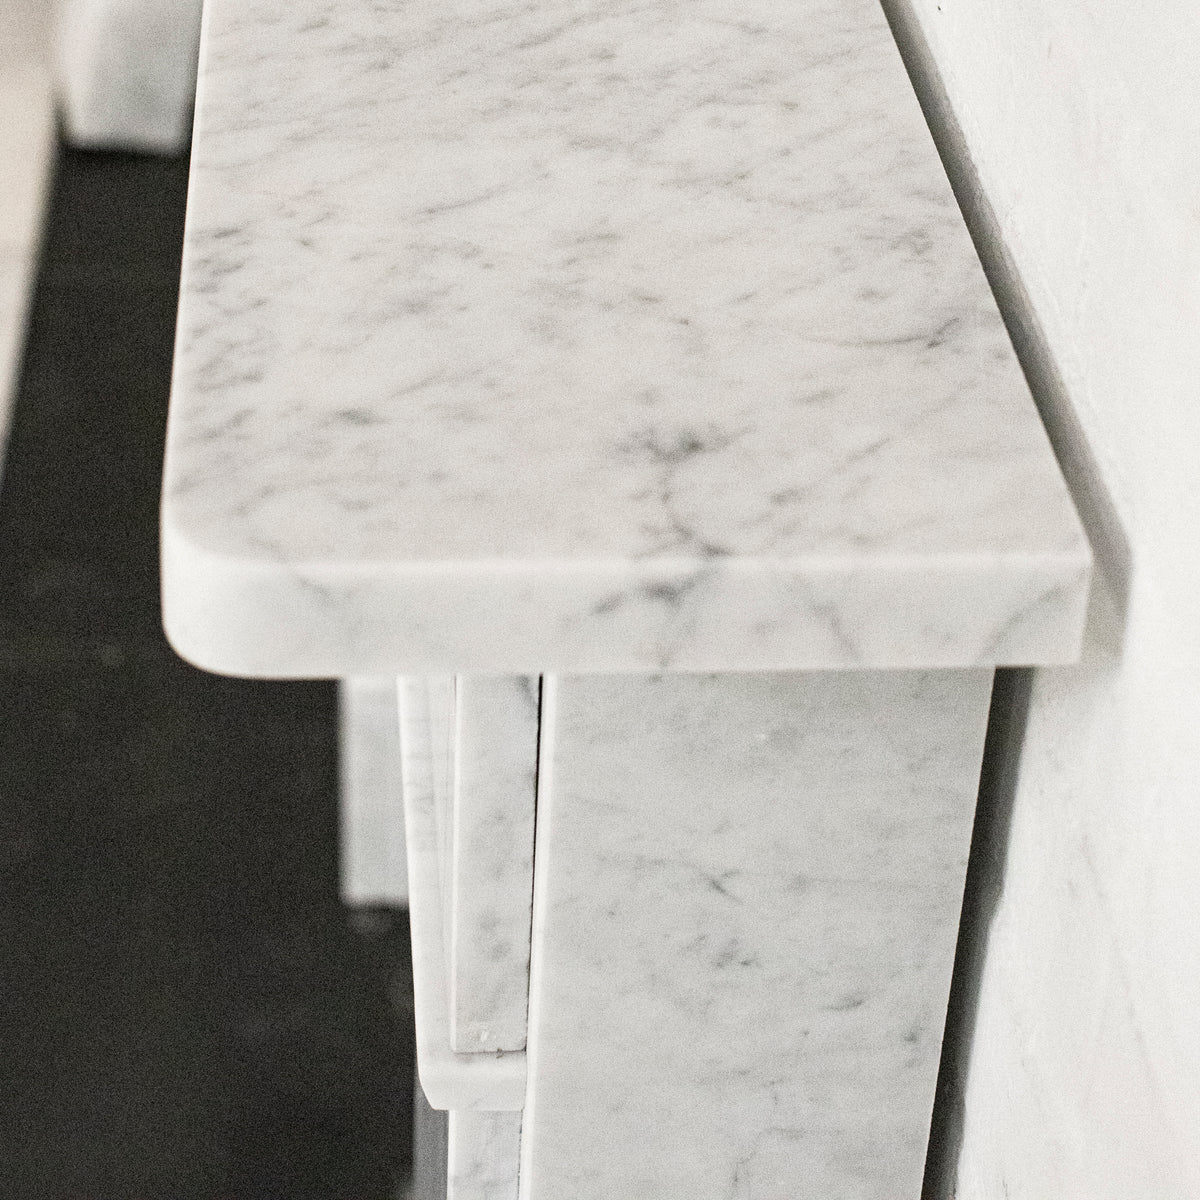 Reclaimed Carrara Marble Fire Surround | The Architectural Forum